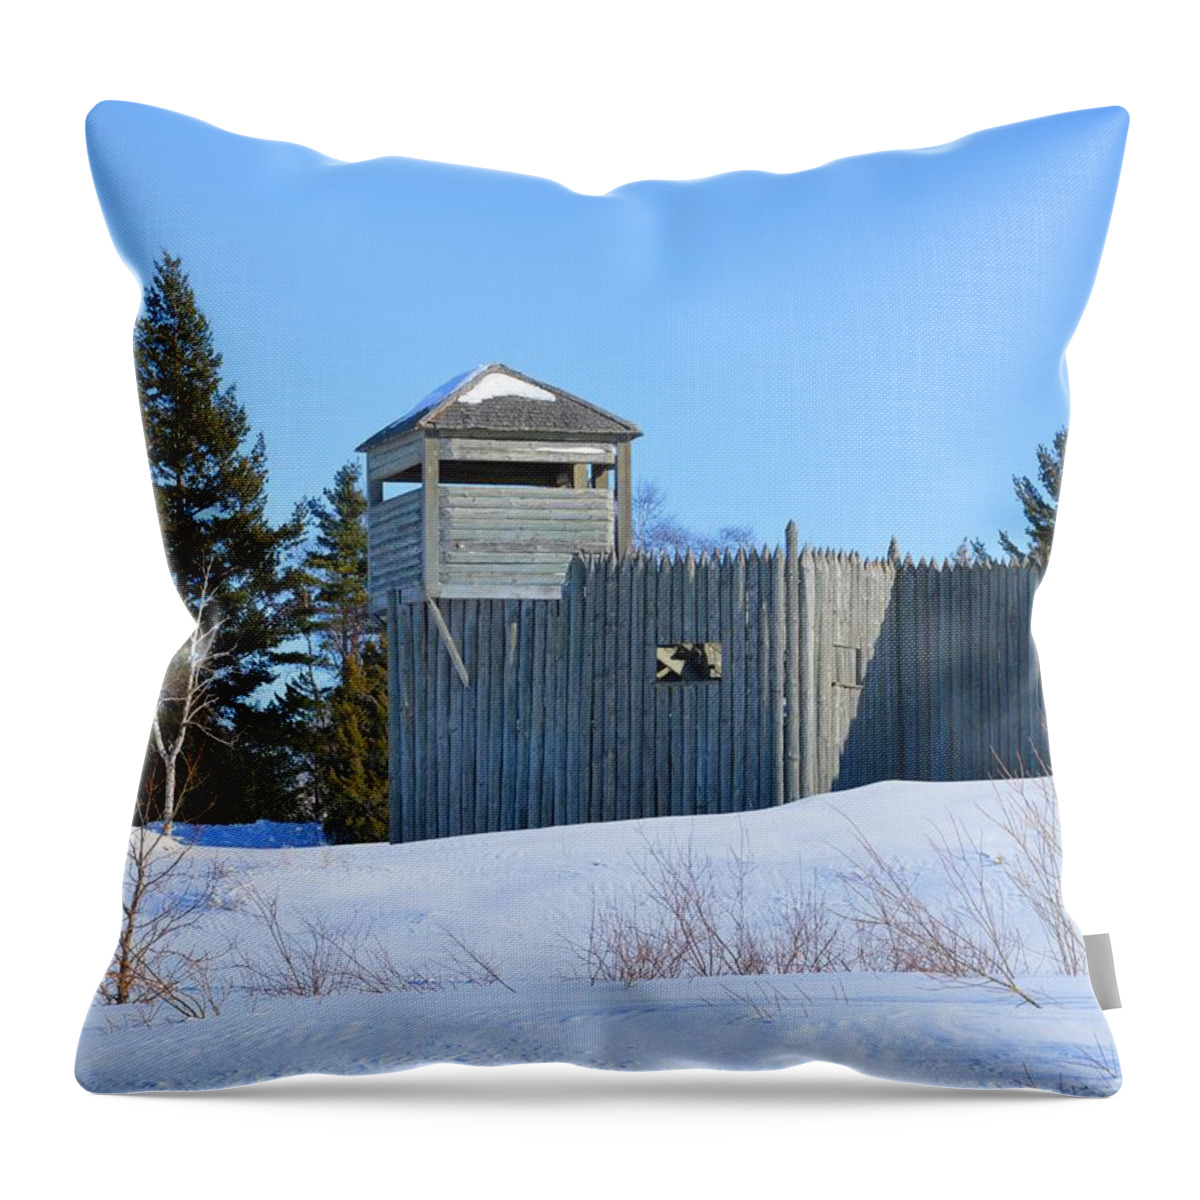 Michigan Throw Pillow featuring the photograph Fort Michilimackinac Northeast Blockhouse by Keith Stokes